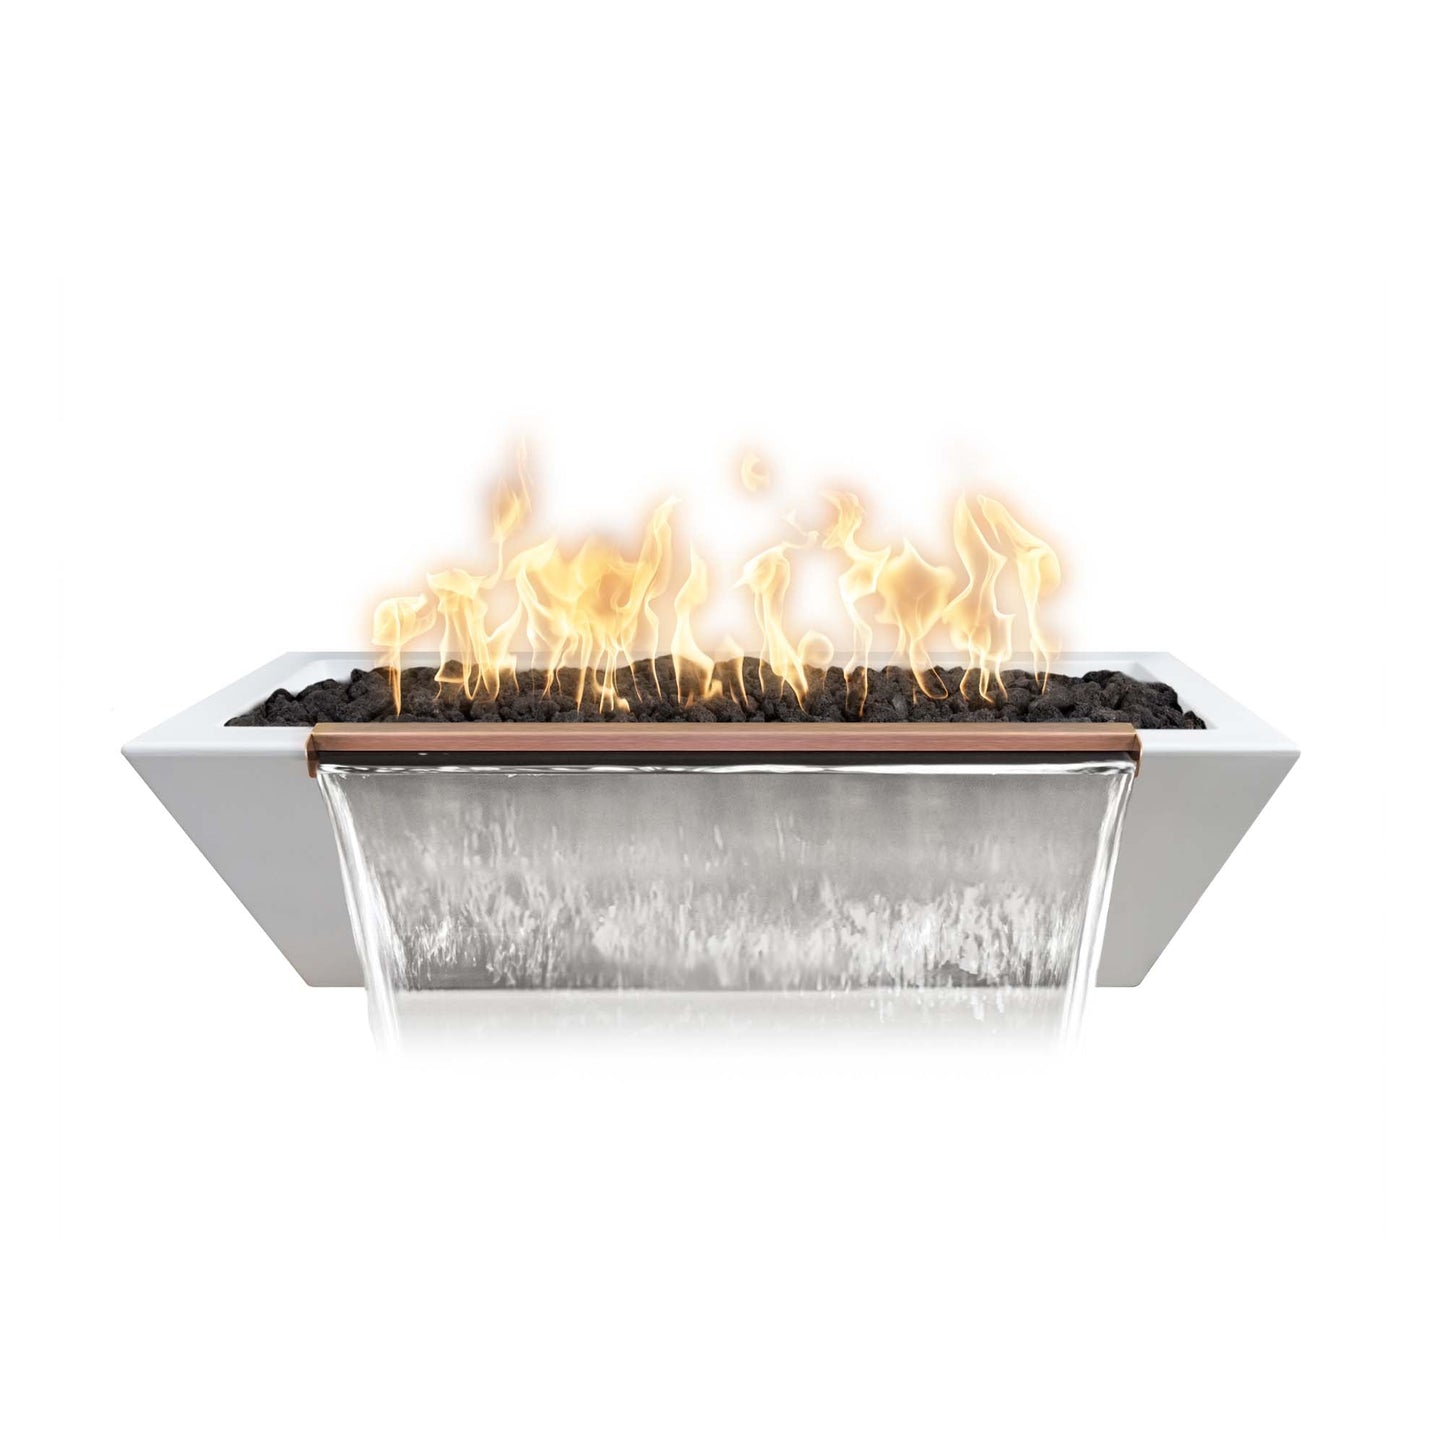 The Outdoor Plus Linear Maya 72" Gray GFRC Concrete Liquid Propane Fire & Water Bowl with Match Lit with Flame Sense Ignition